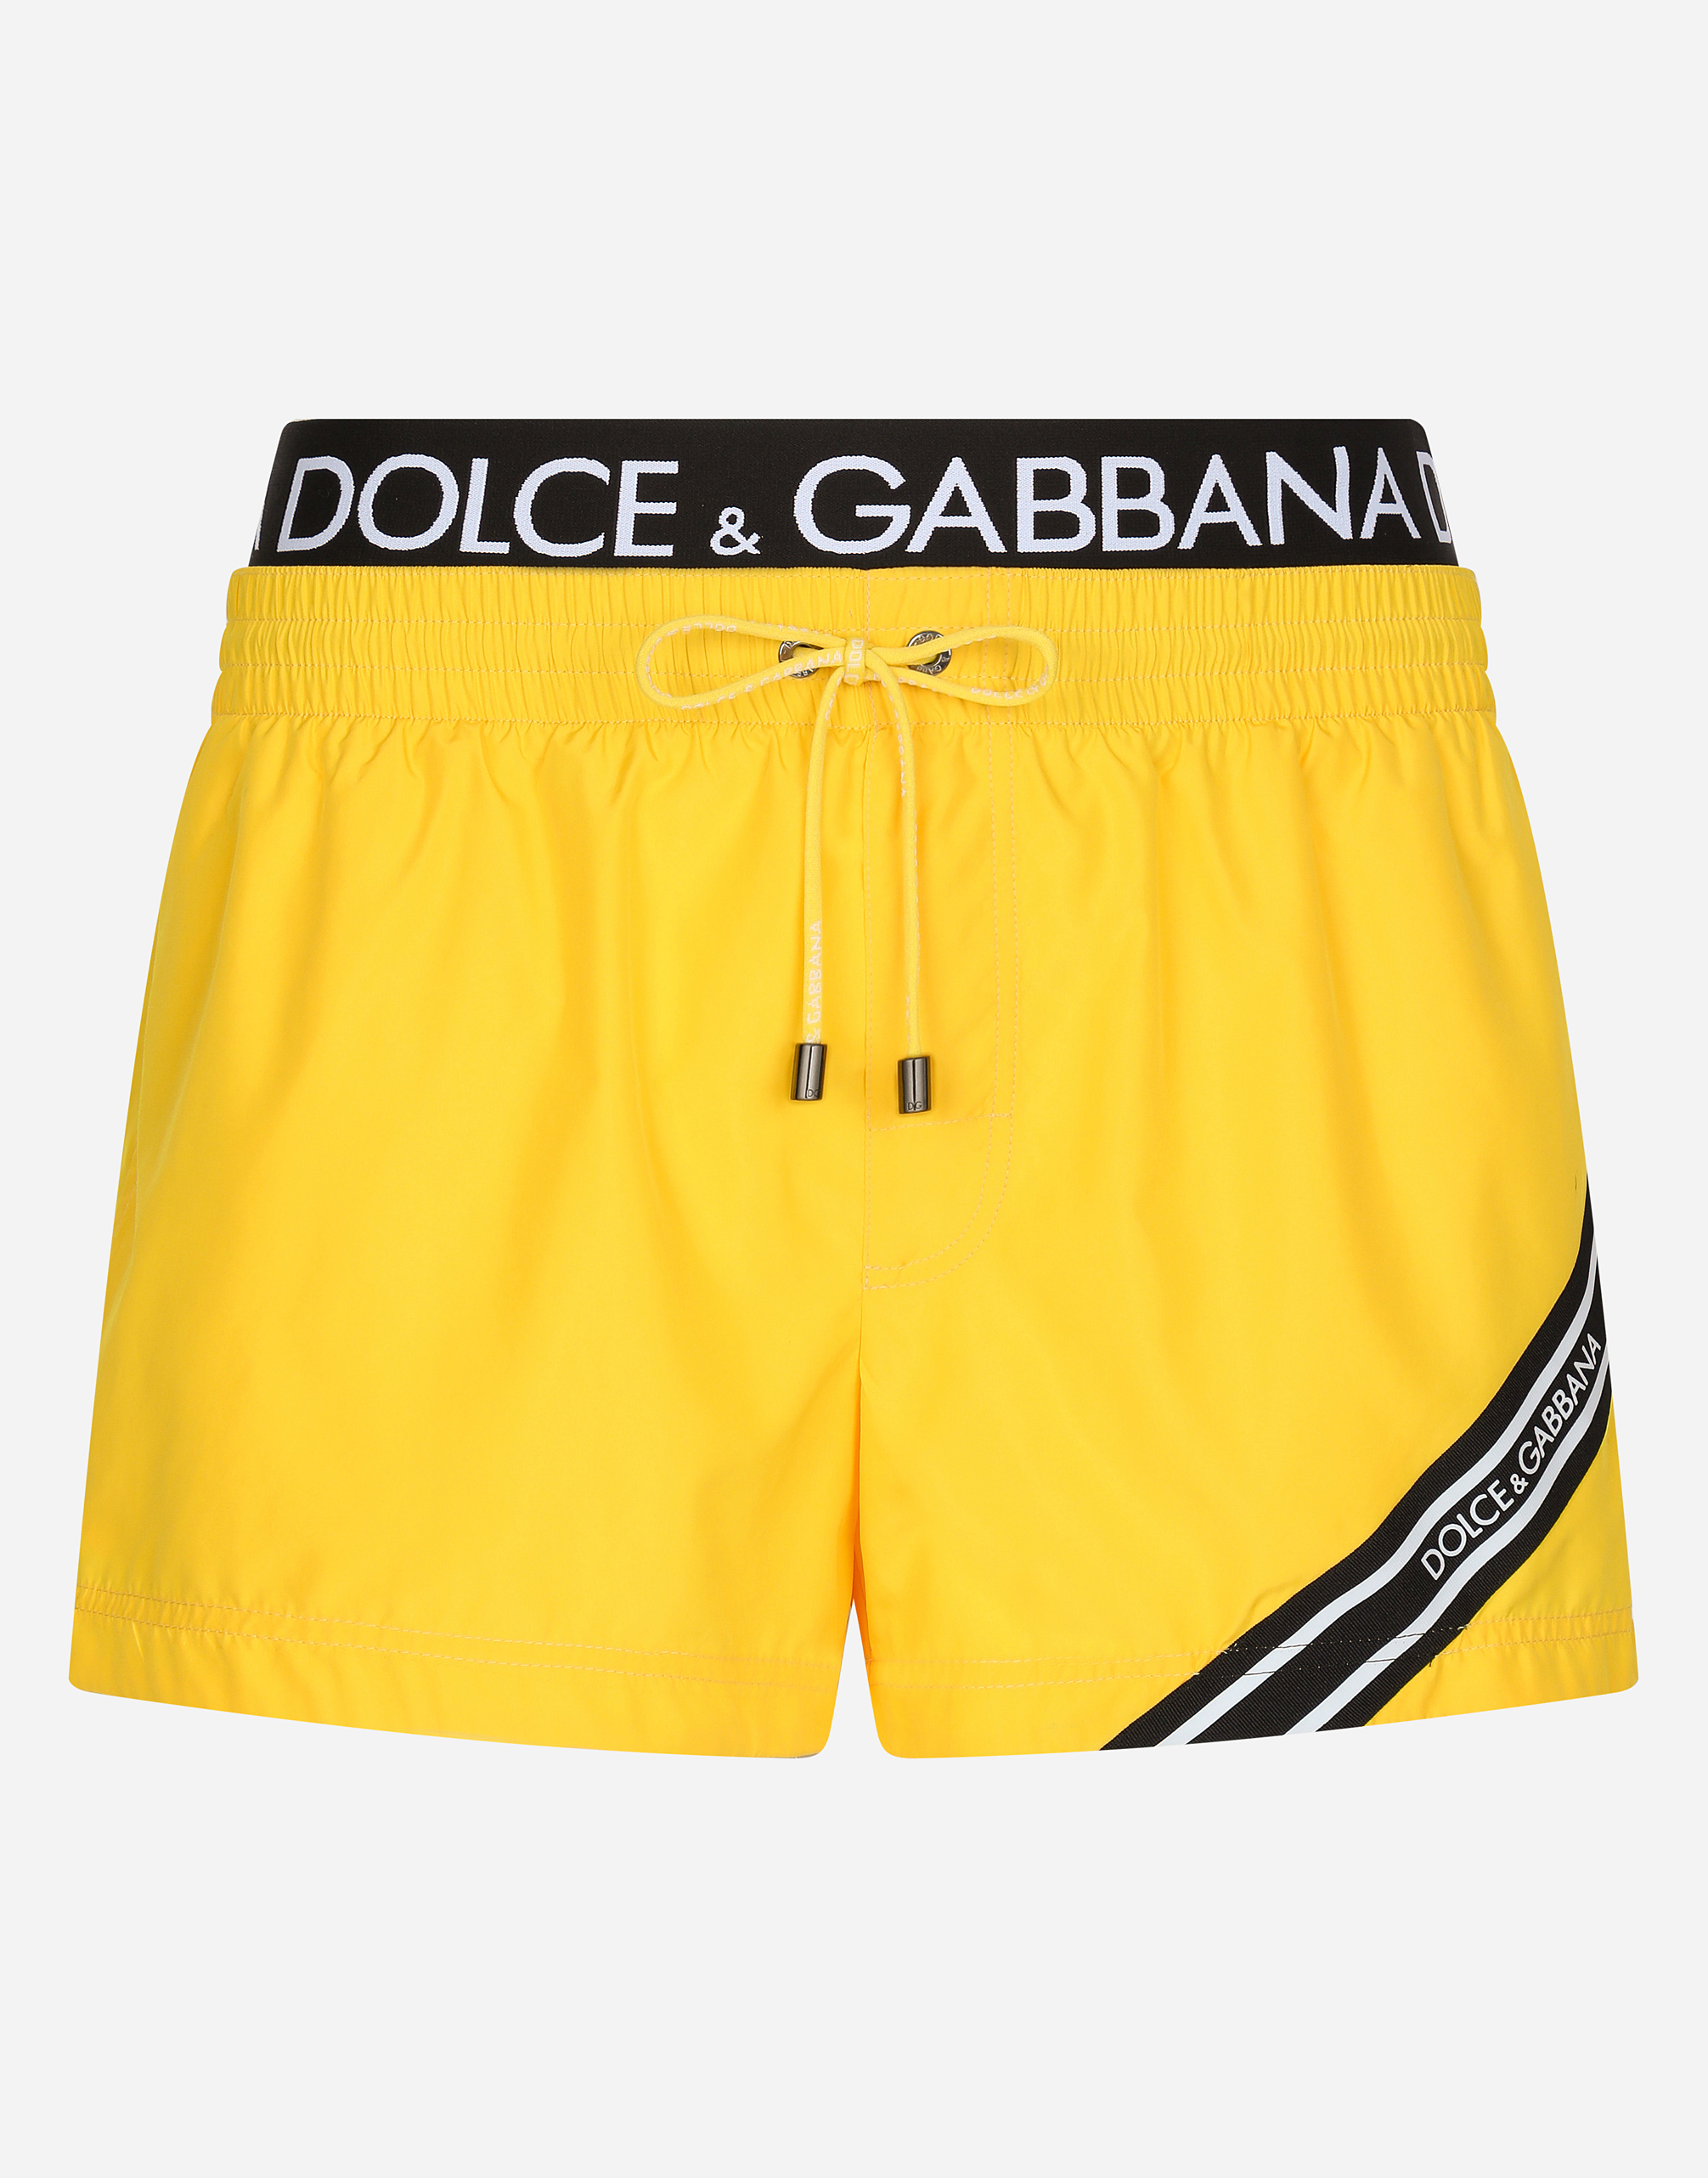 Short swim trunks with branded band in Yellow